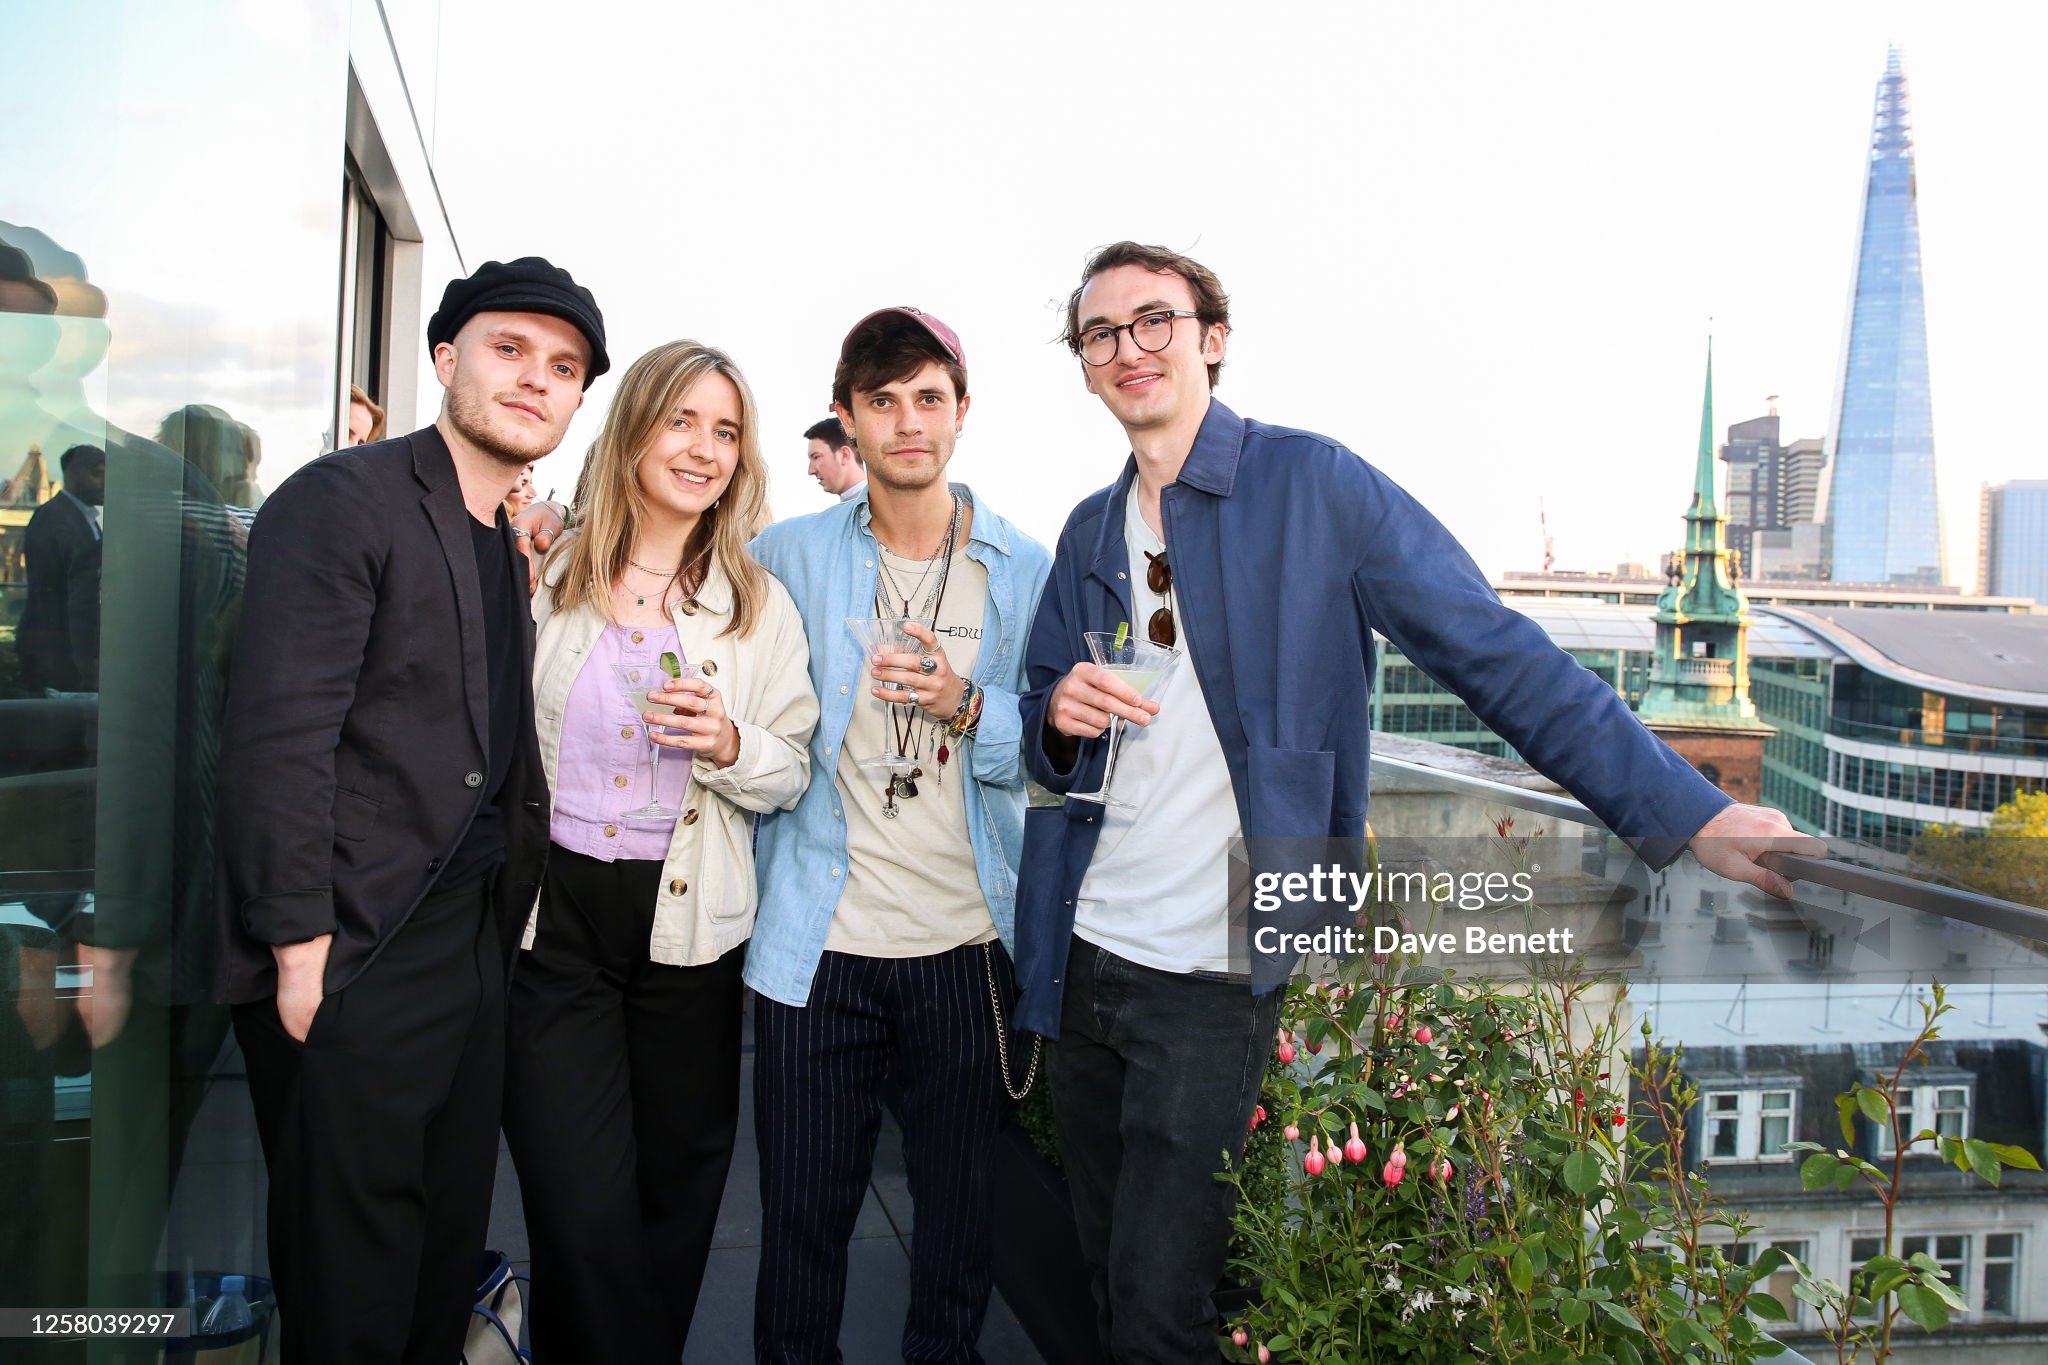 bloom-by-four-seasons-at-ten-trinity-square-rooftop-terrace-launch.jpg